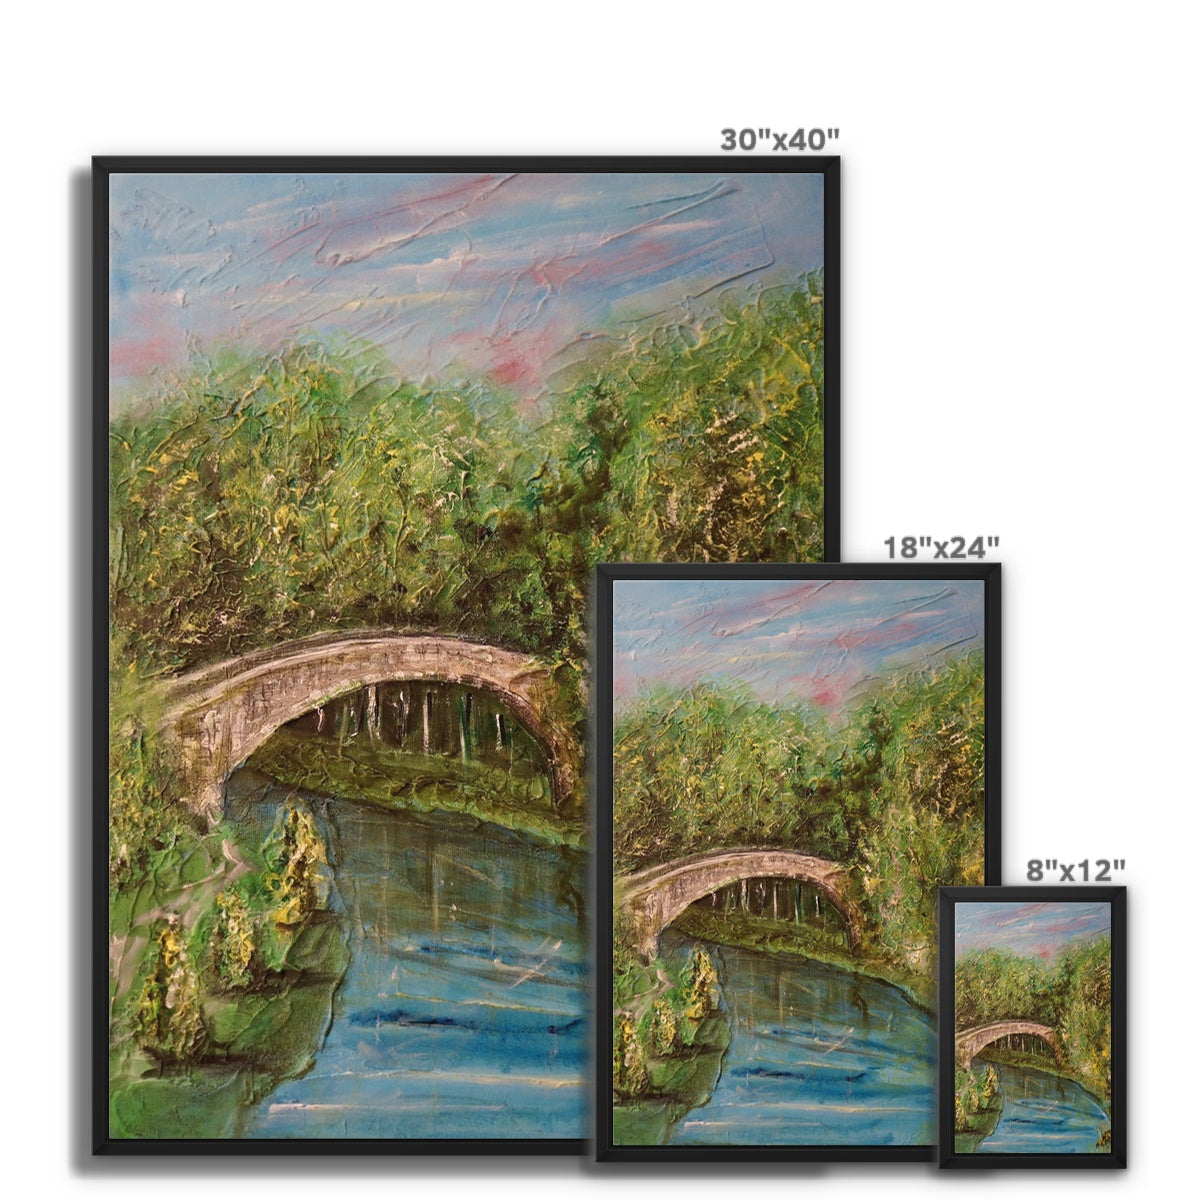 The Brig O Doon Painting | Framed Canvas From Scotland-Floating Framed Canvas Prints-Historic & Iconic Scotland Art Gallery-Paintings, Prints, Homeware, Art Gifts From Scotland By Scottish Artist Kevin Hunter